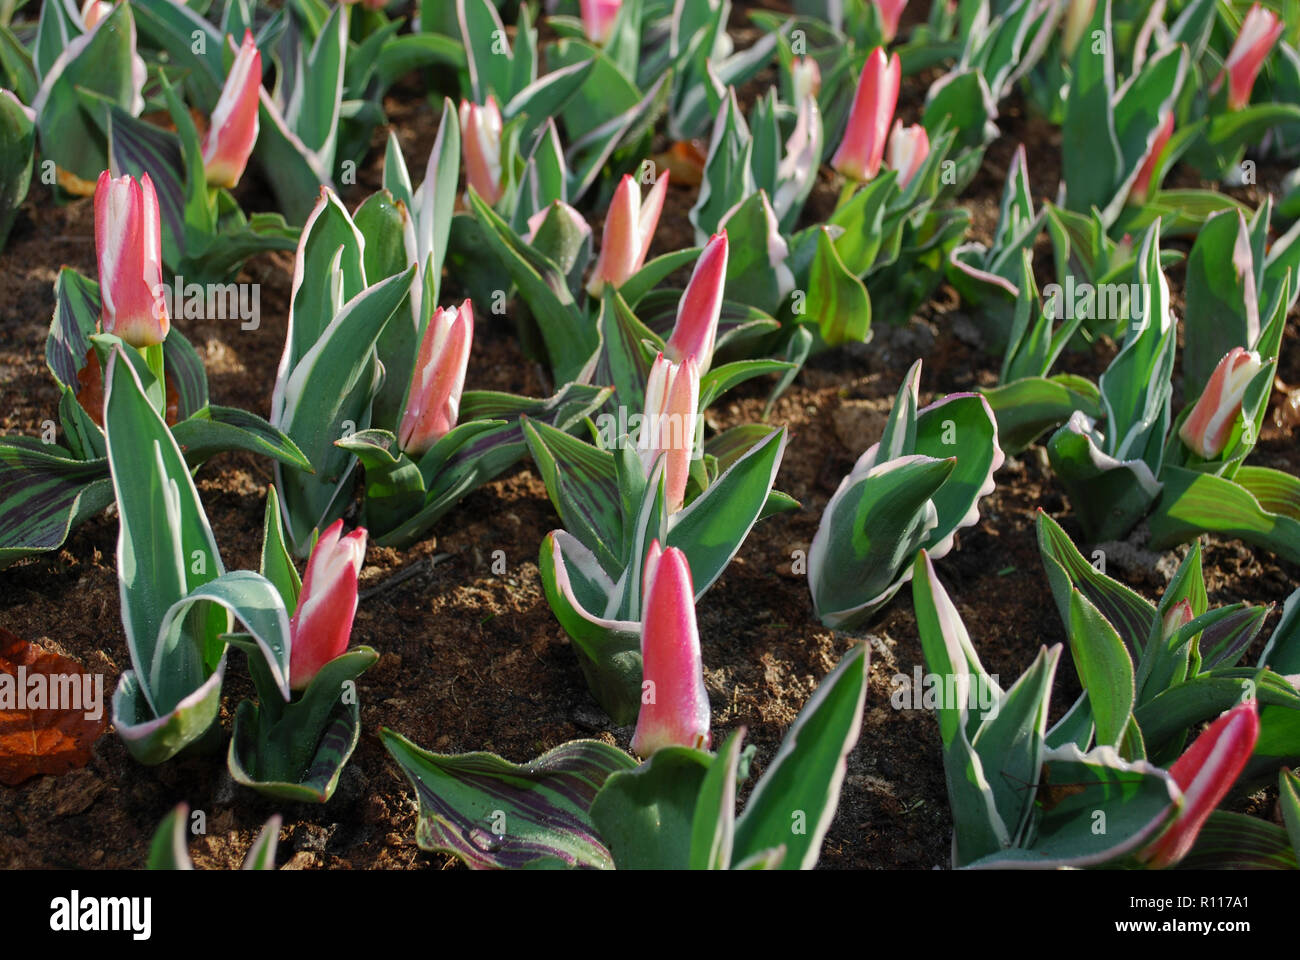 Tulipa Kaufmanniana Heart’s Delight grown in the park.  Spring time in Netherlands. Stock Photo